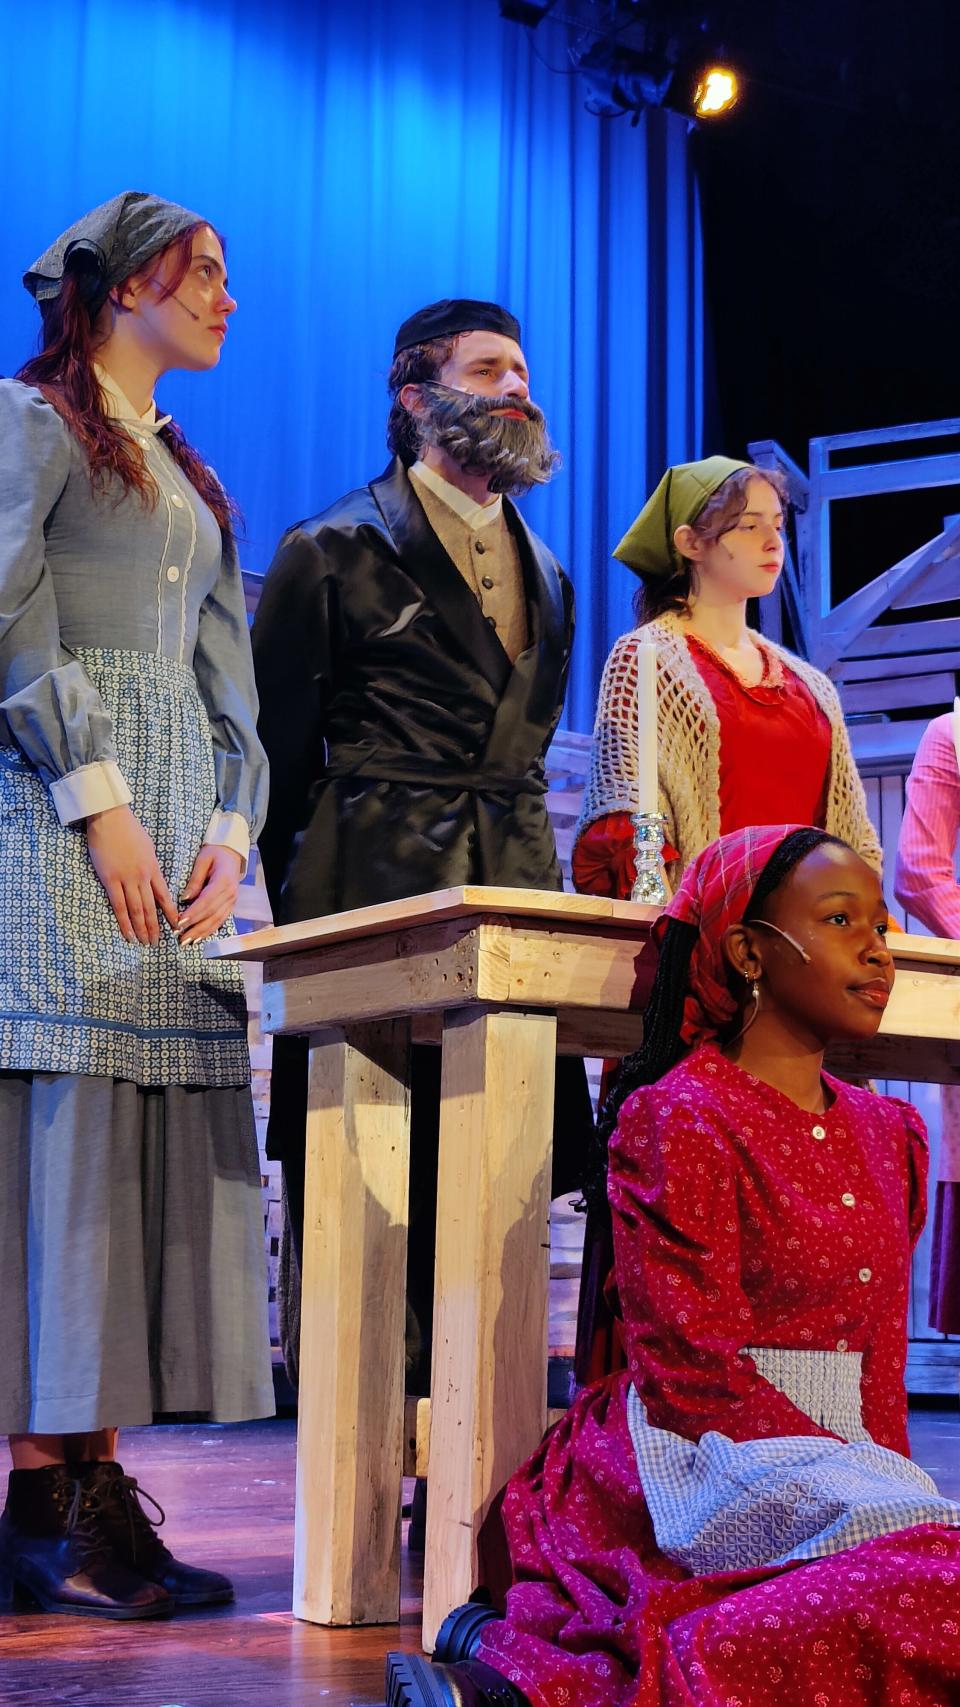 The cast of Dobbs Ferry High School's production of "Fiddler on the Roof" includes, from left: Eve Bolger as Tzeitel, Anthony Palumbo as Tevye, Anna Schriever as Golde and, seated, 
Heidi Gastorn as Bielke. Performances at 7 p.m., April 12; 1 and 7 p.m., April 13.